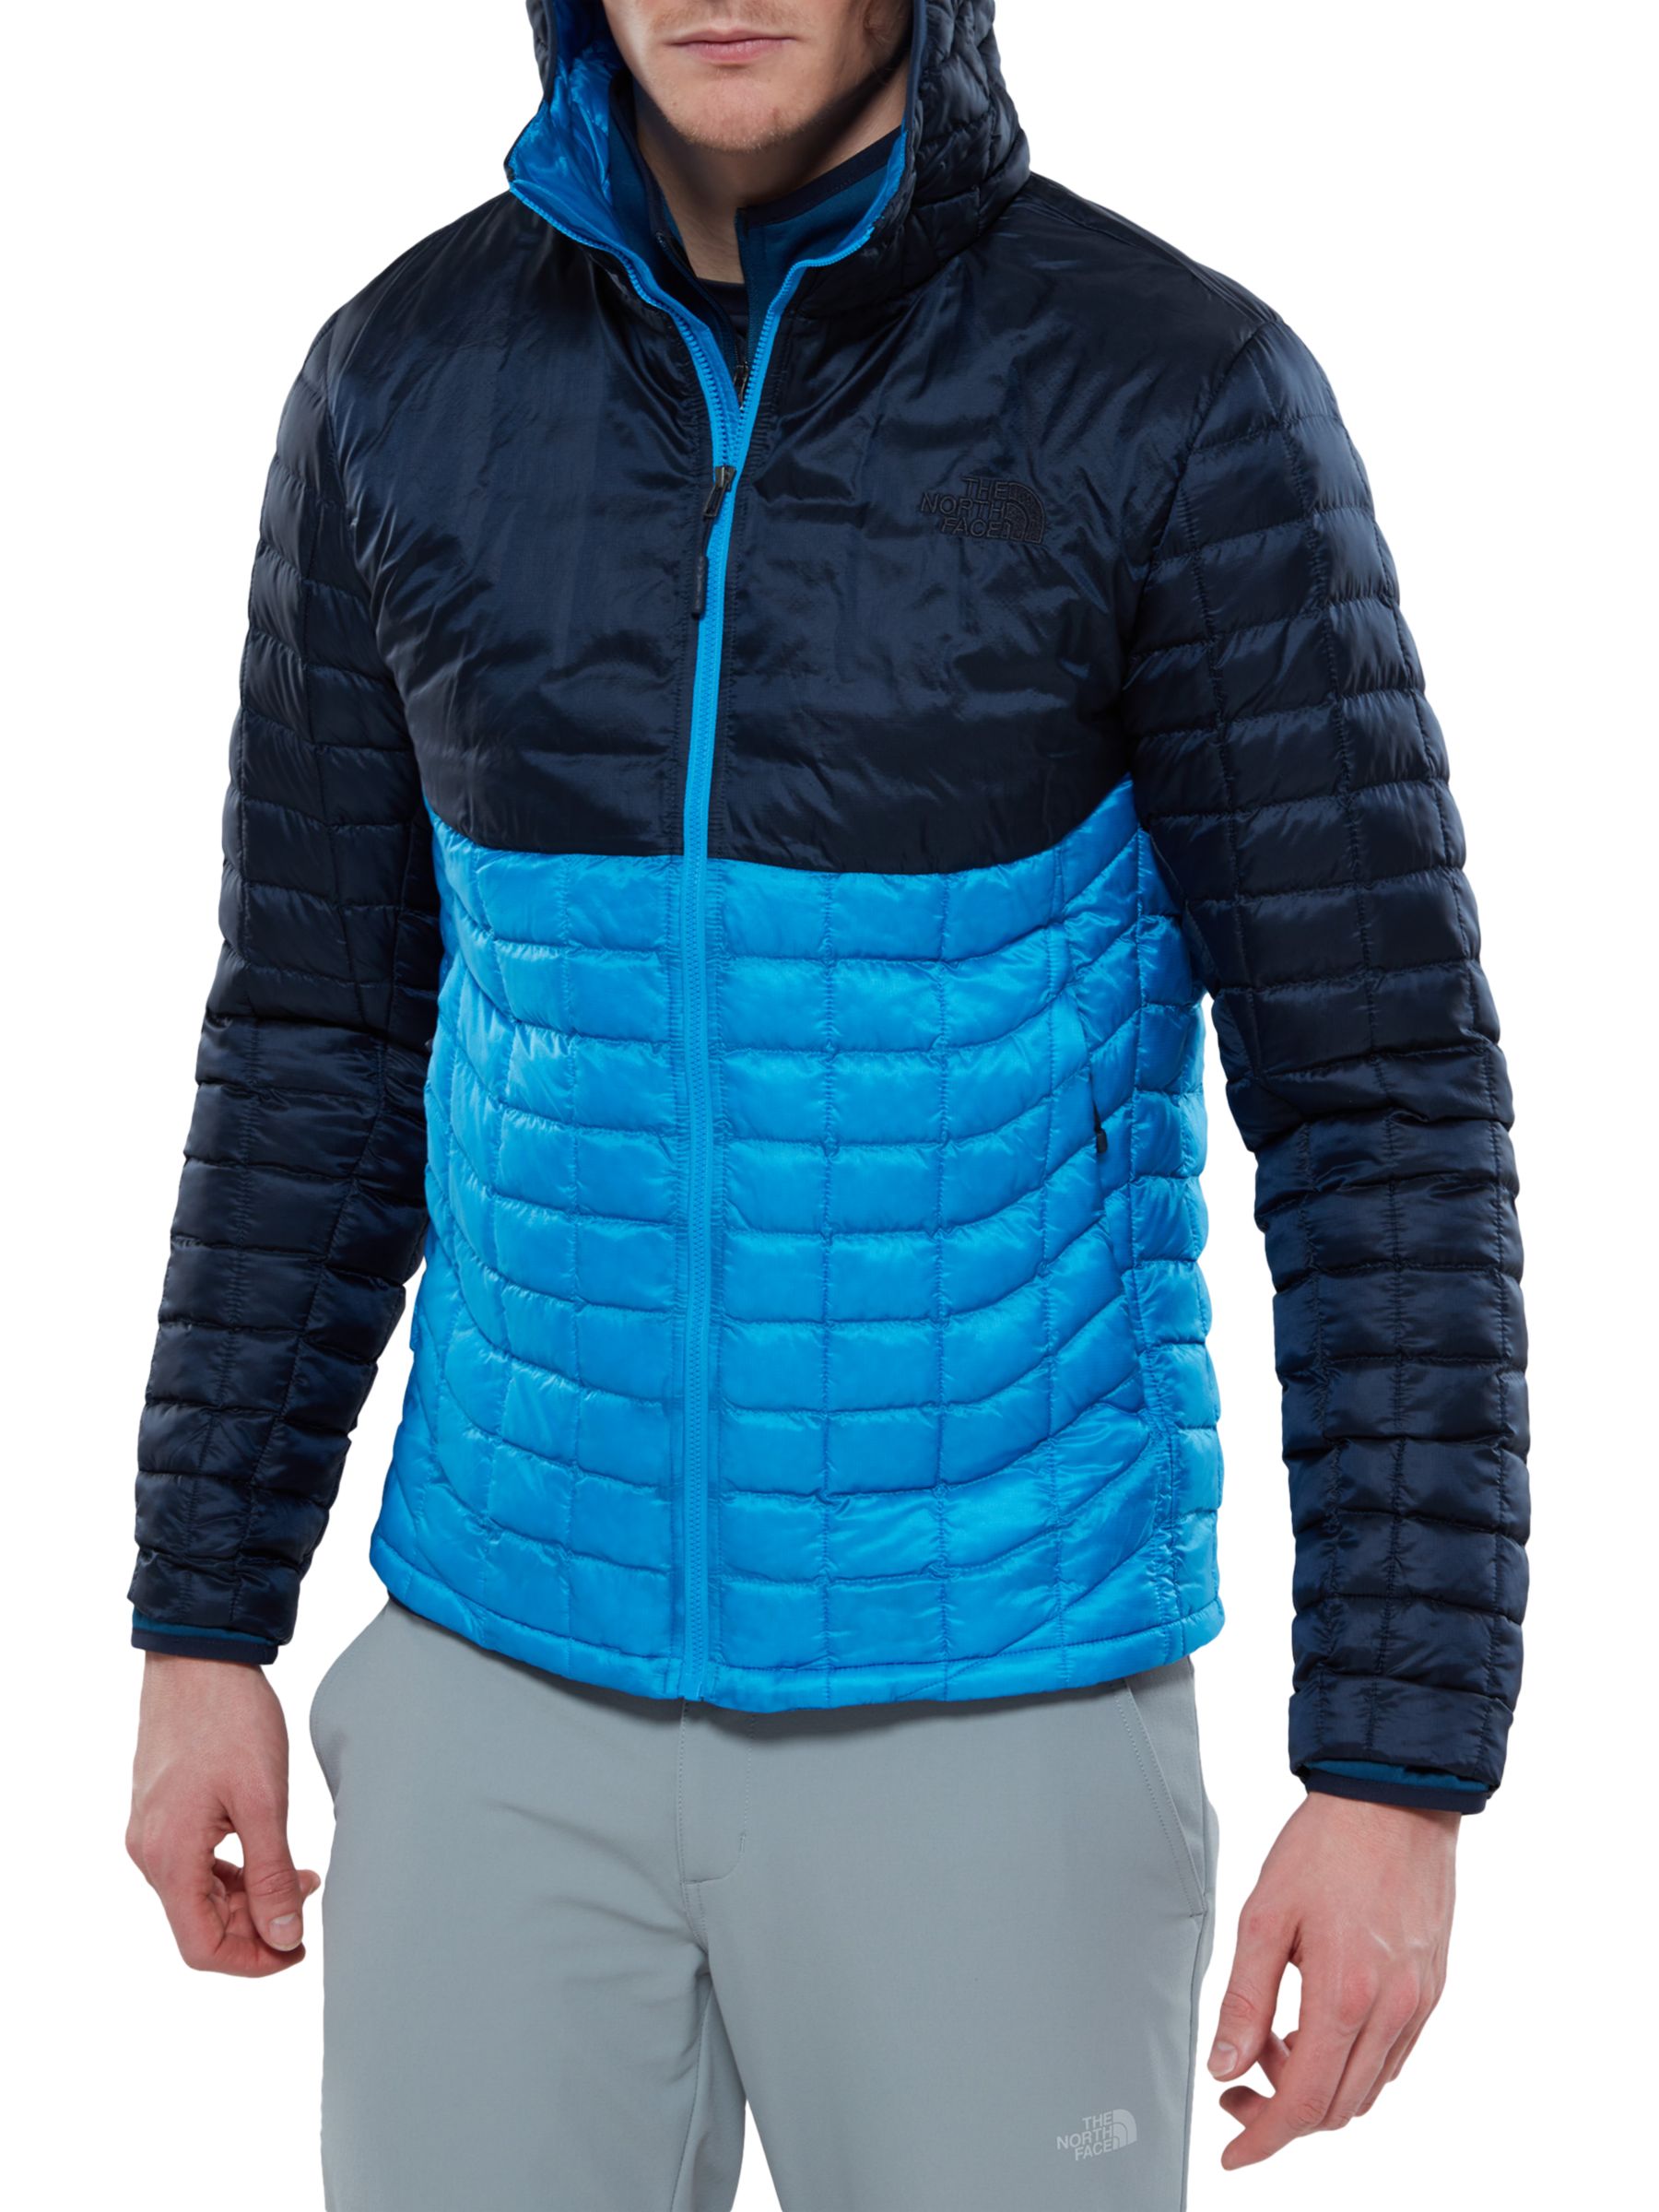 north face men's thermoball hoodie jacket